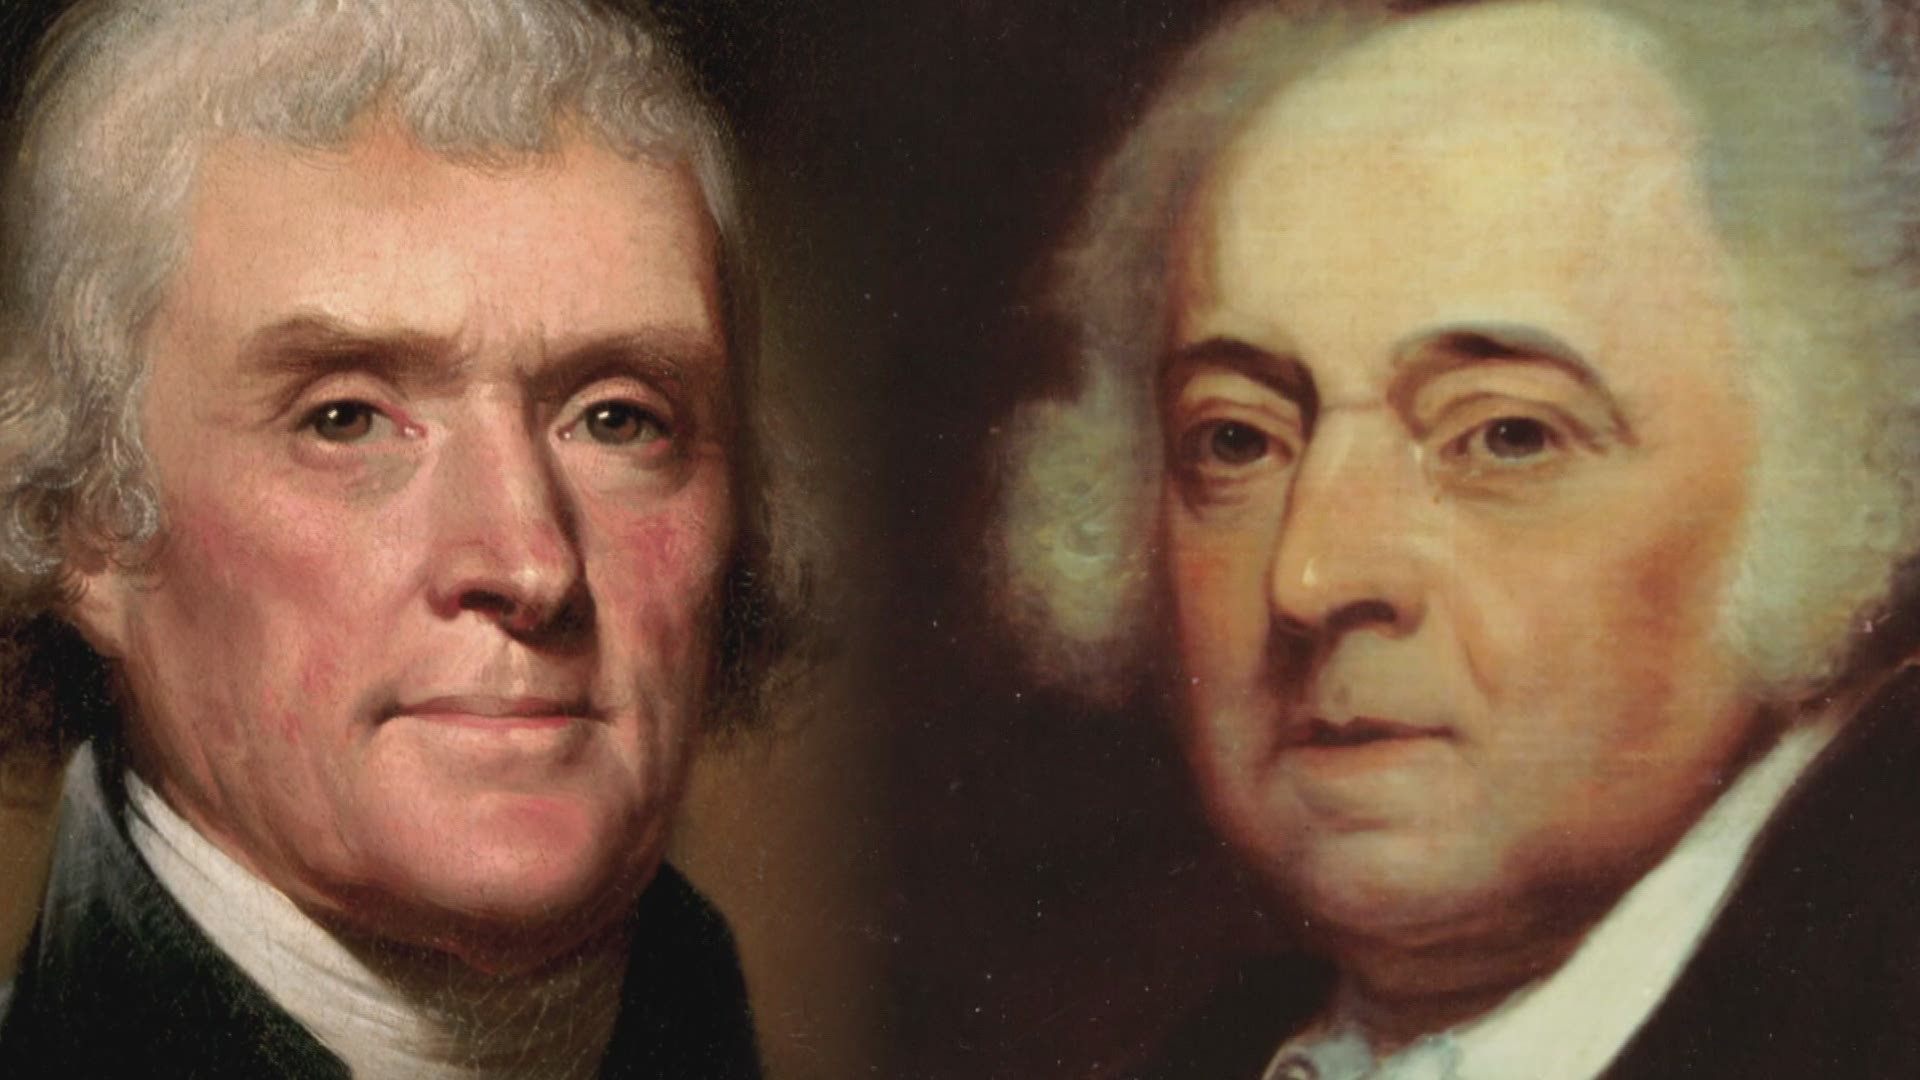 John Adams, embittered by defeat, did the equivalent of leaving town on a bus